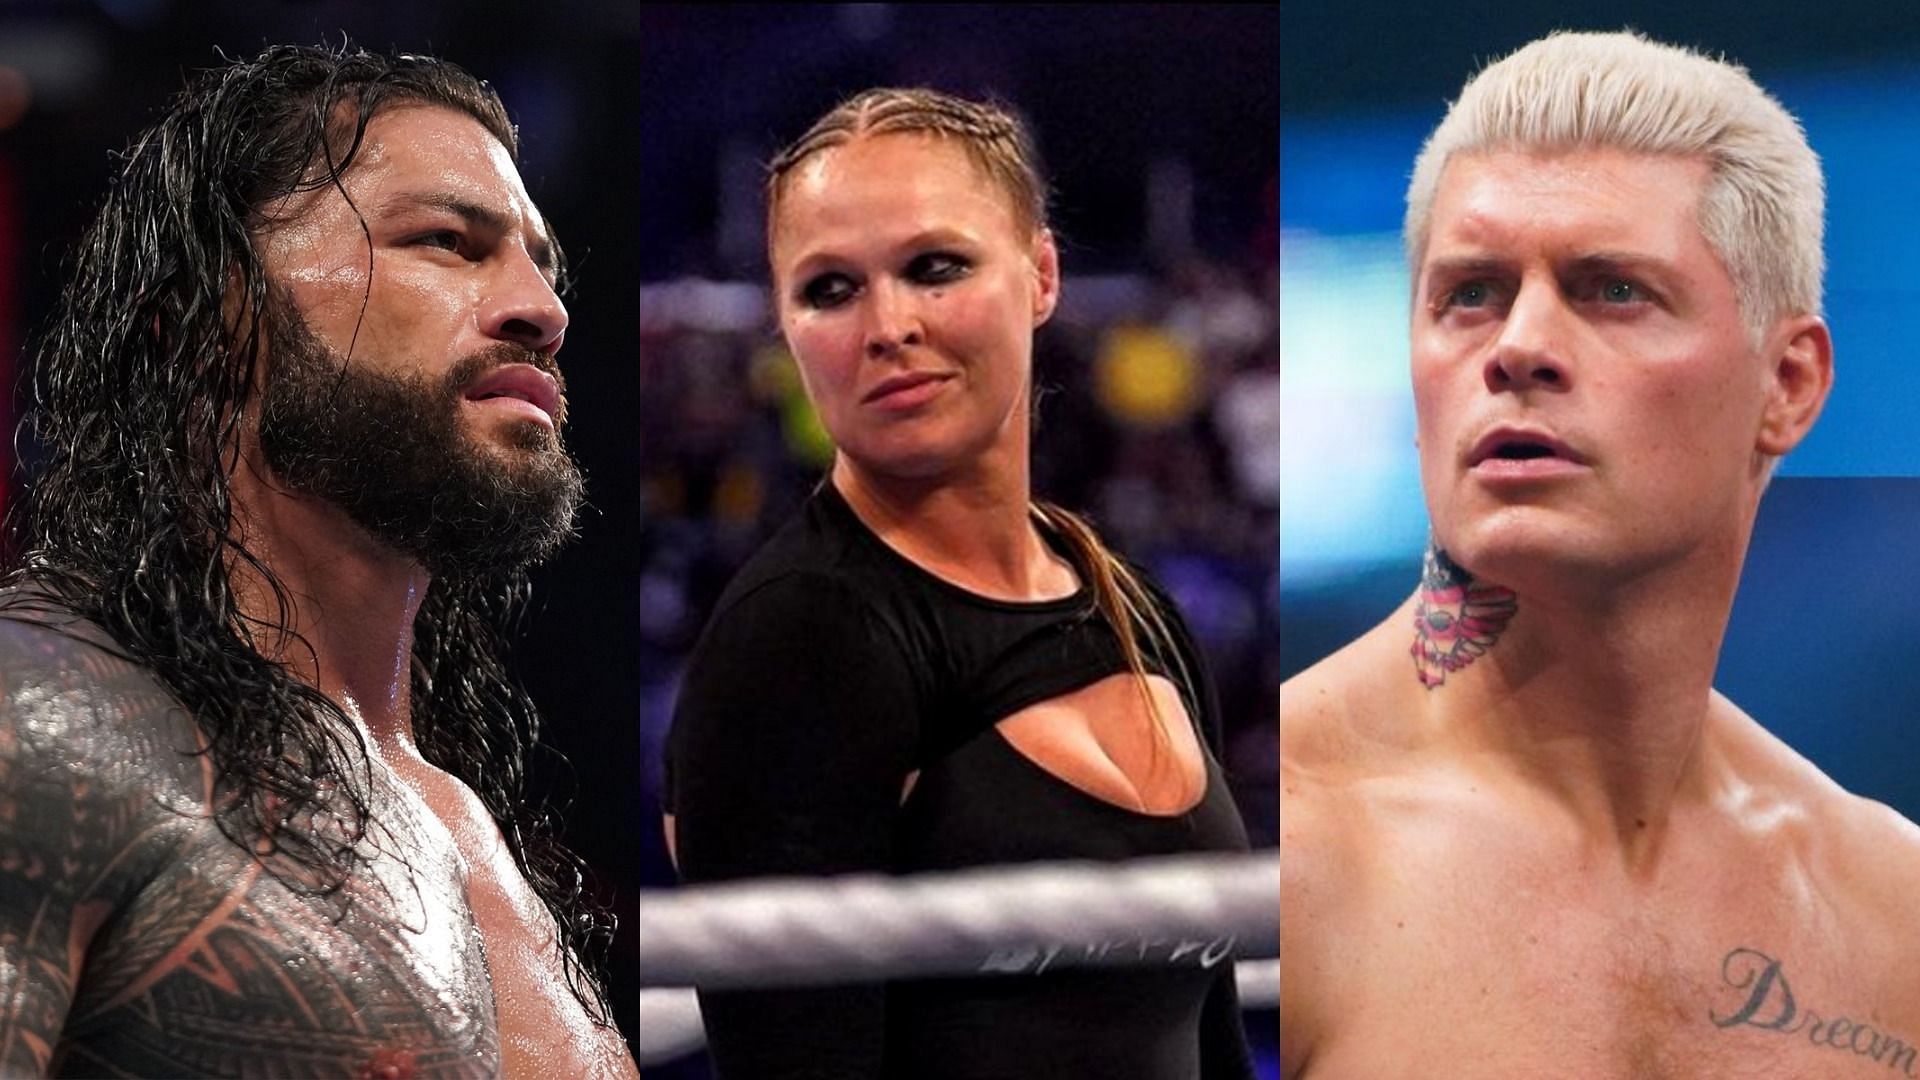 Roman Reigns (left); Ronda Rousey (middle), Cody Rhodes (right)